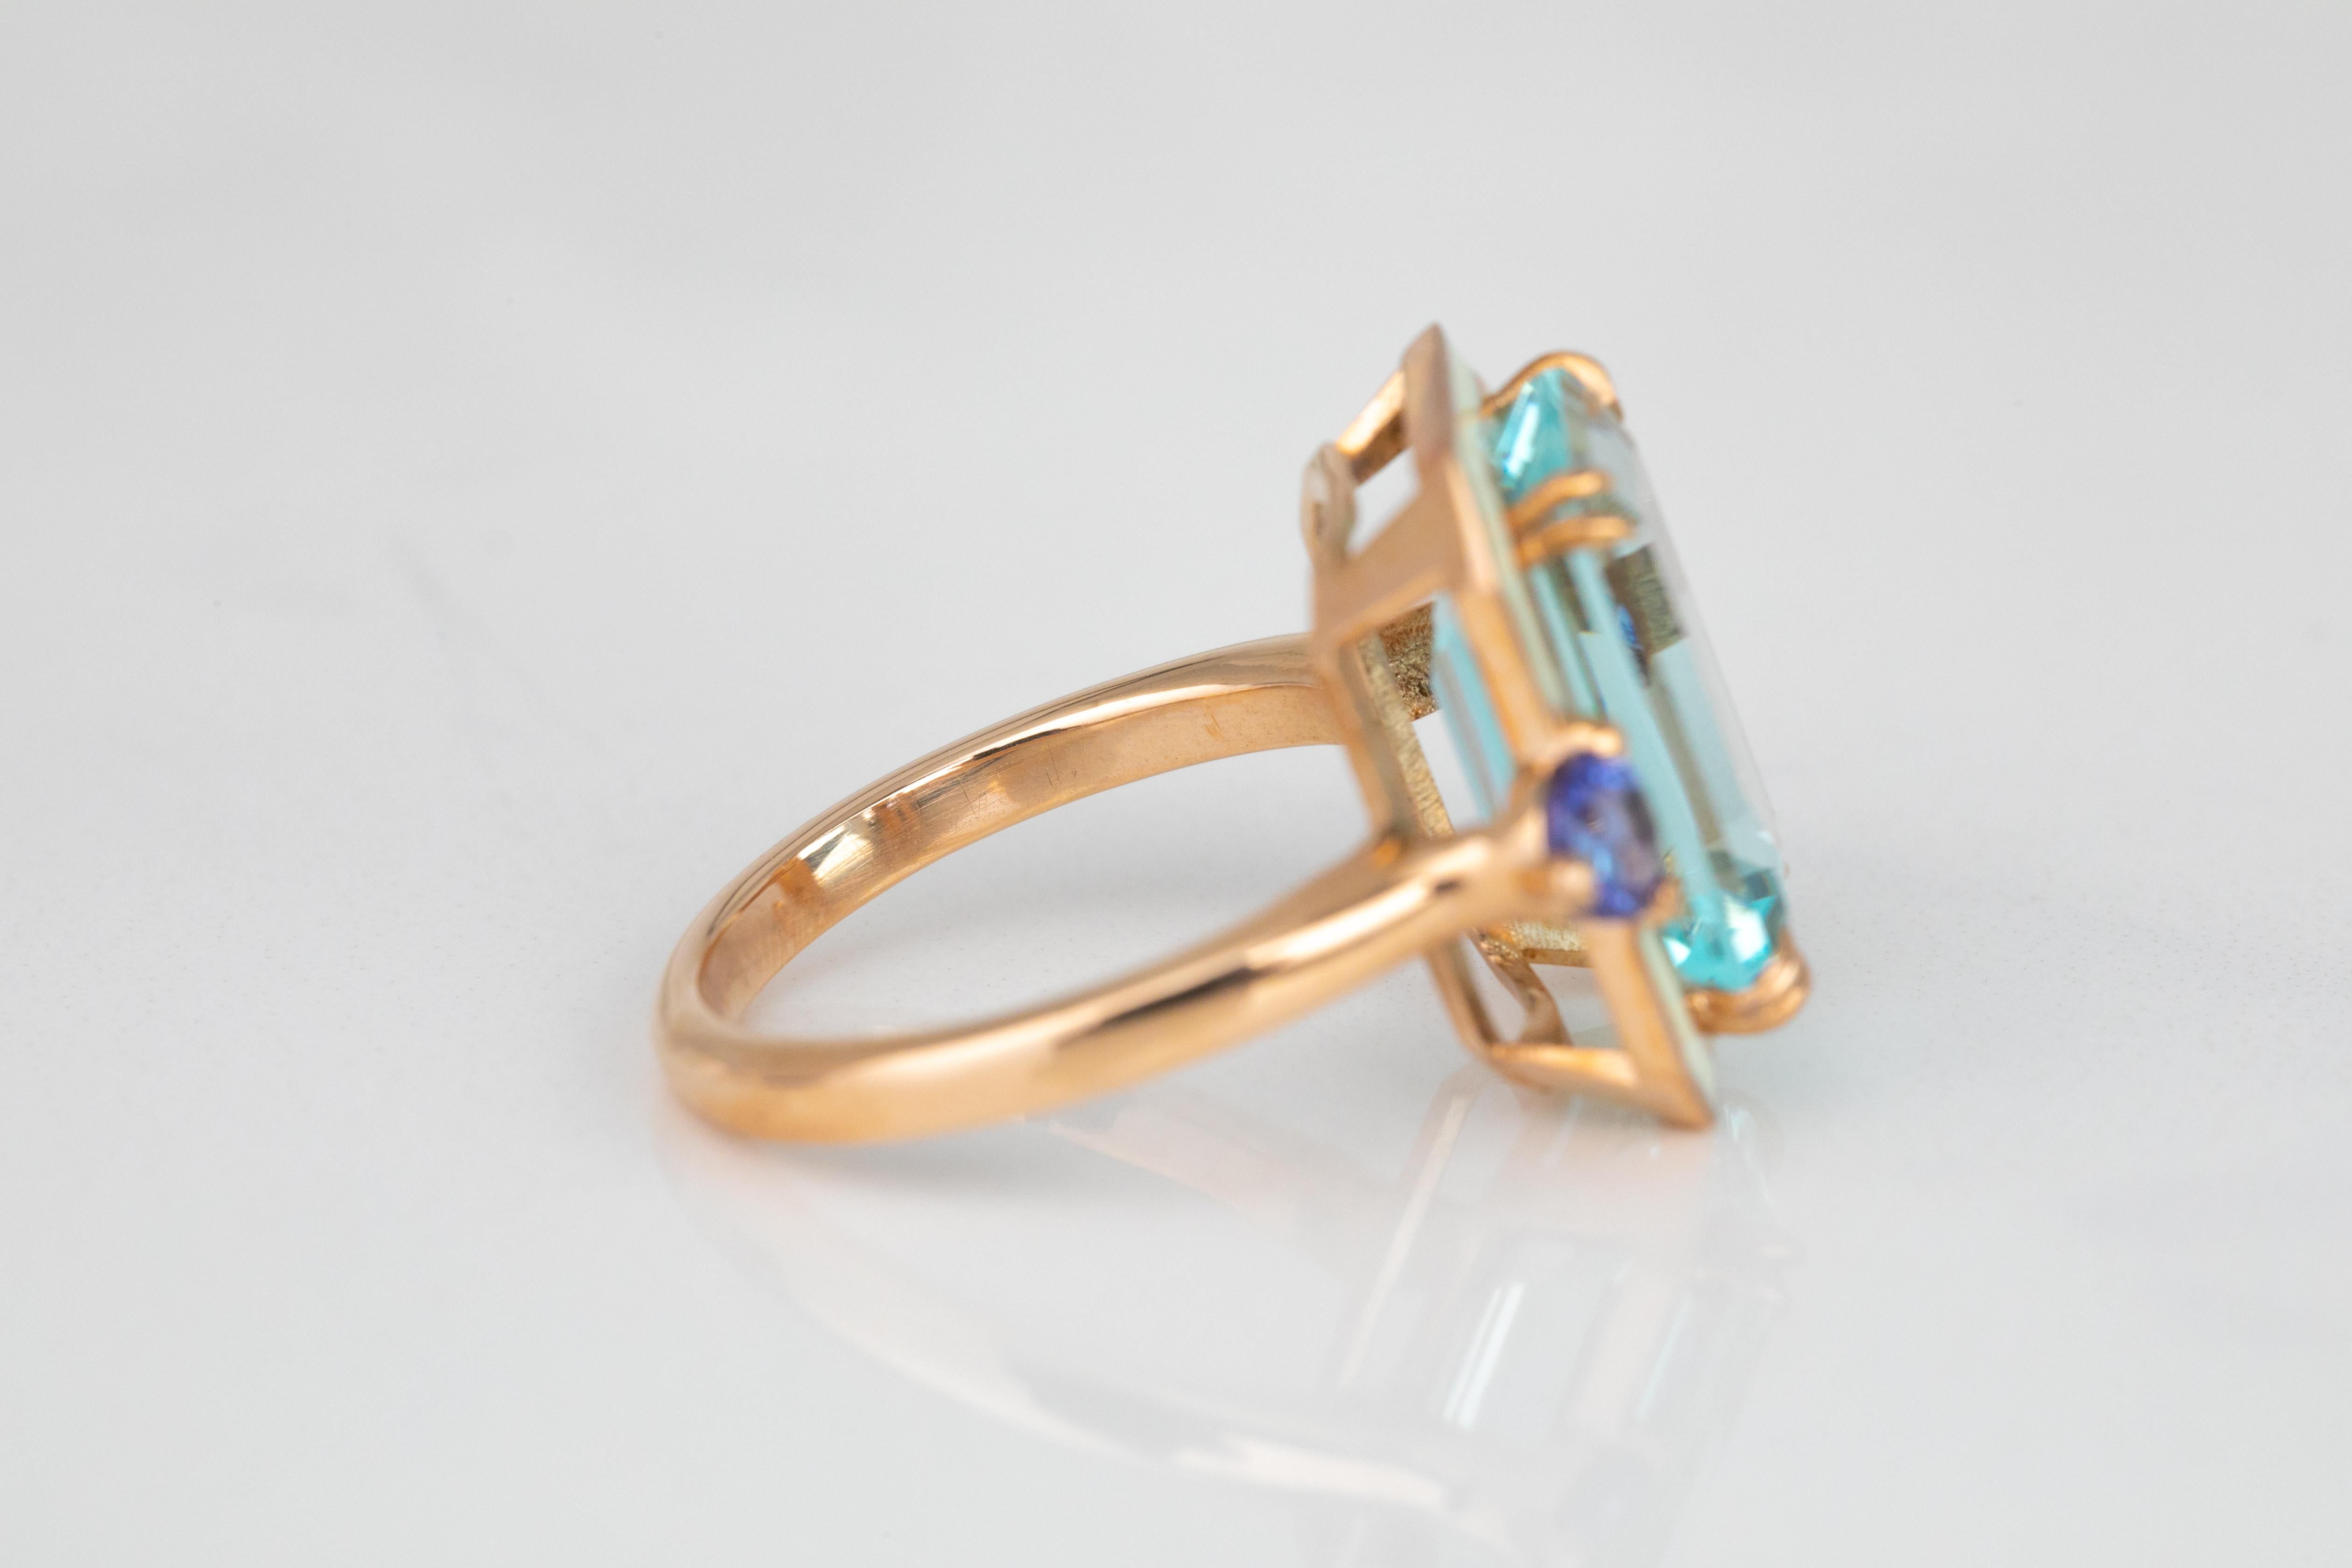 For Sale:  Art Deco Style 14k Rose Gold Ring 6.13ct Sky Topaz and 0.40ct Ceylon Sapphire 3